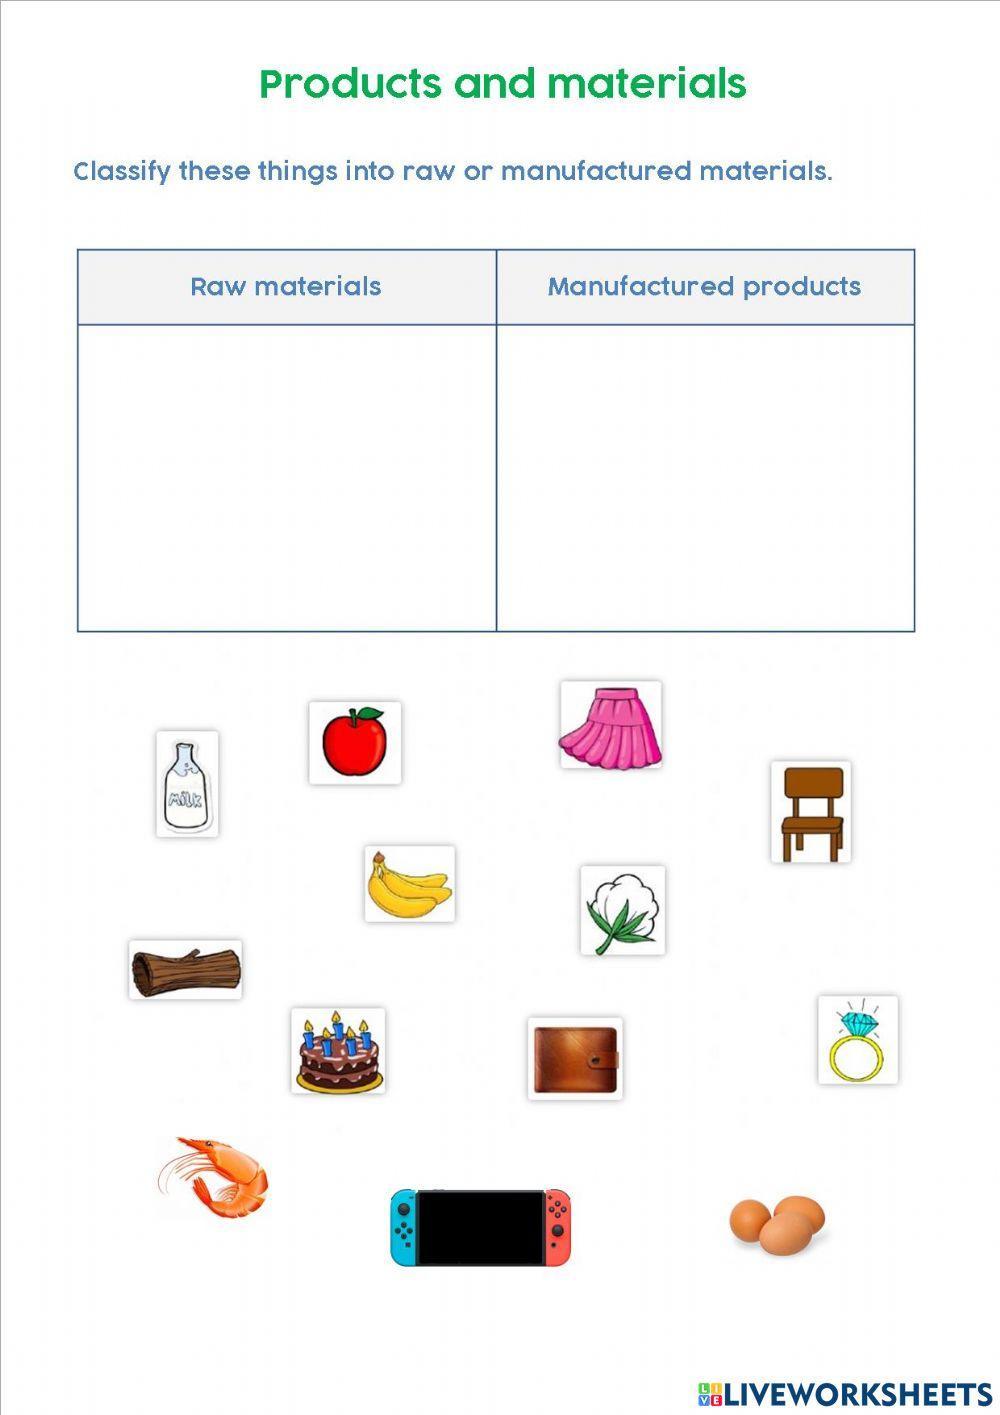 Raw materials & manufactured products